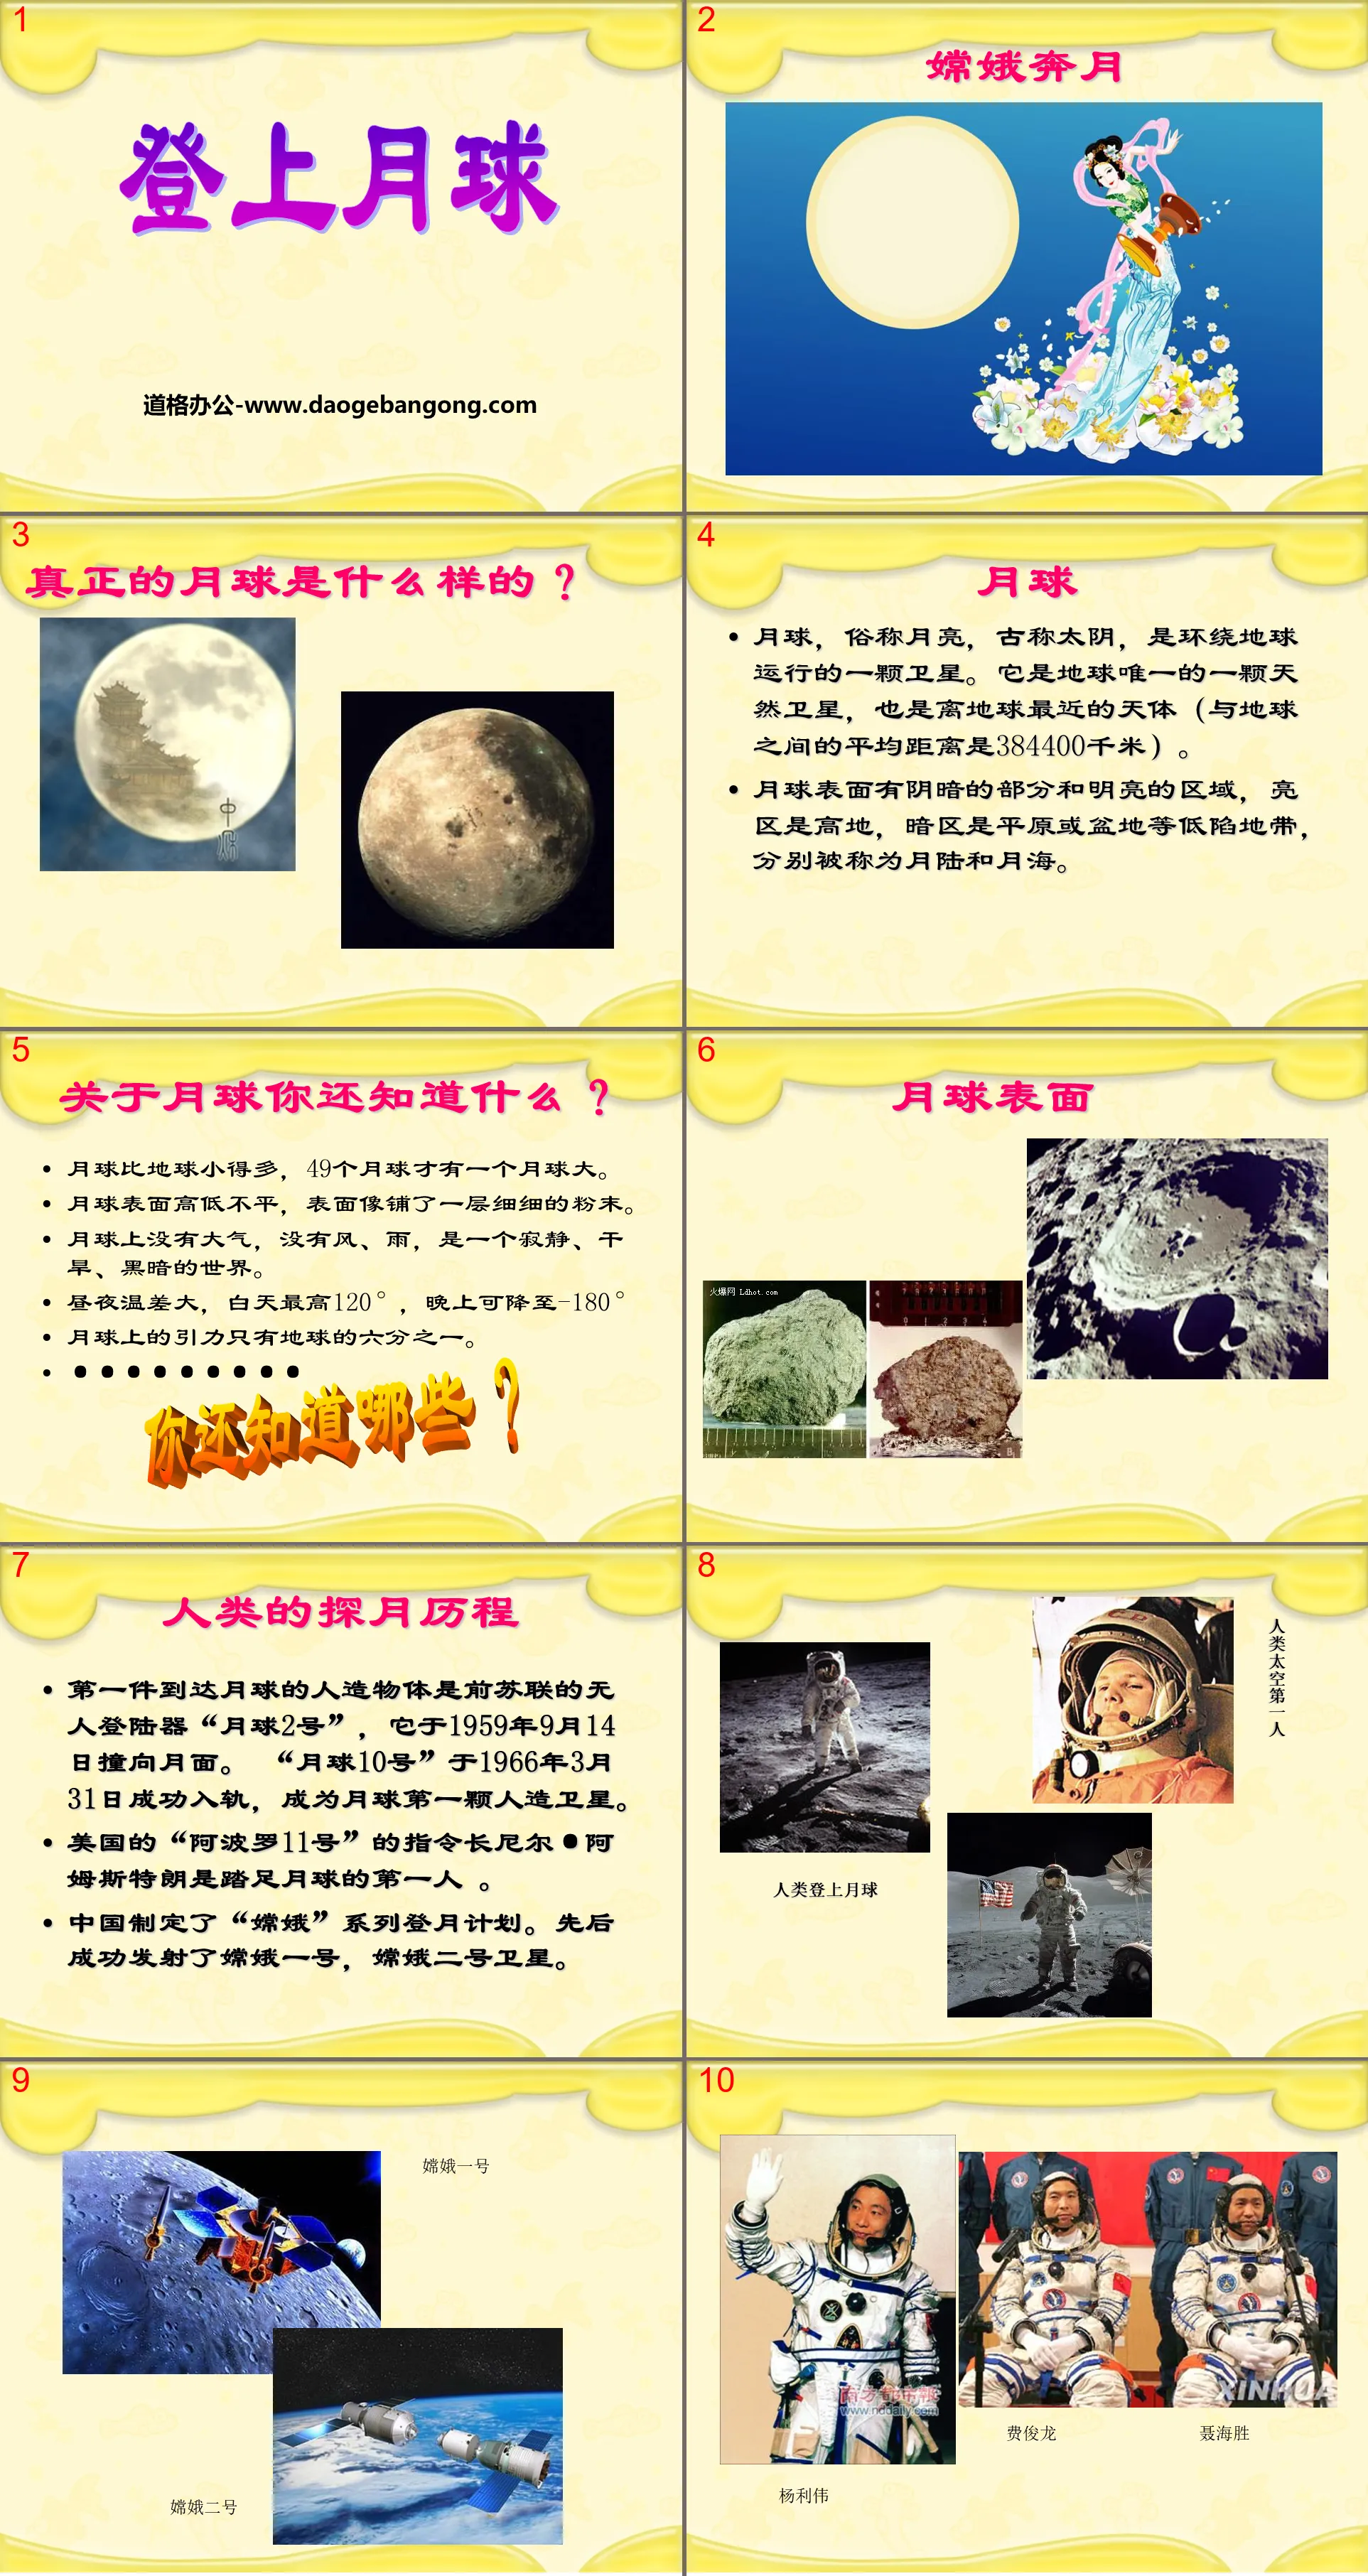 "Going to the Moon" PPT courseware